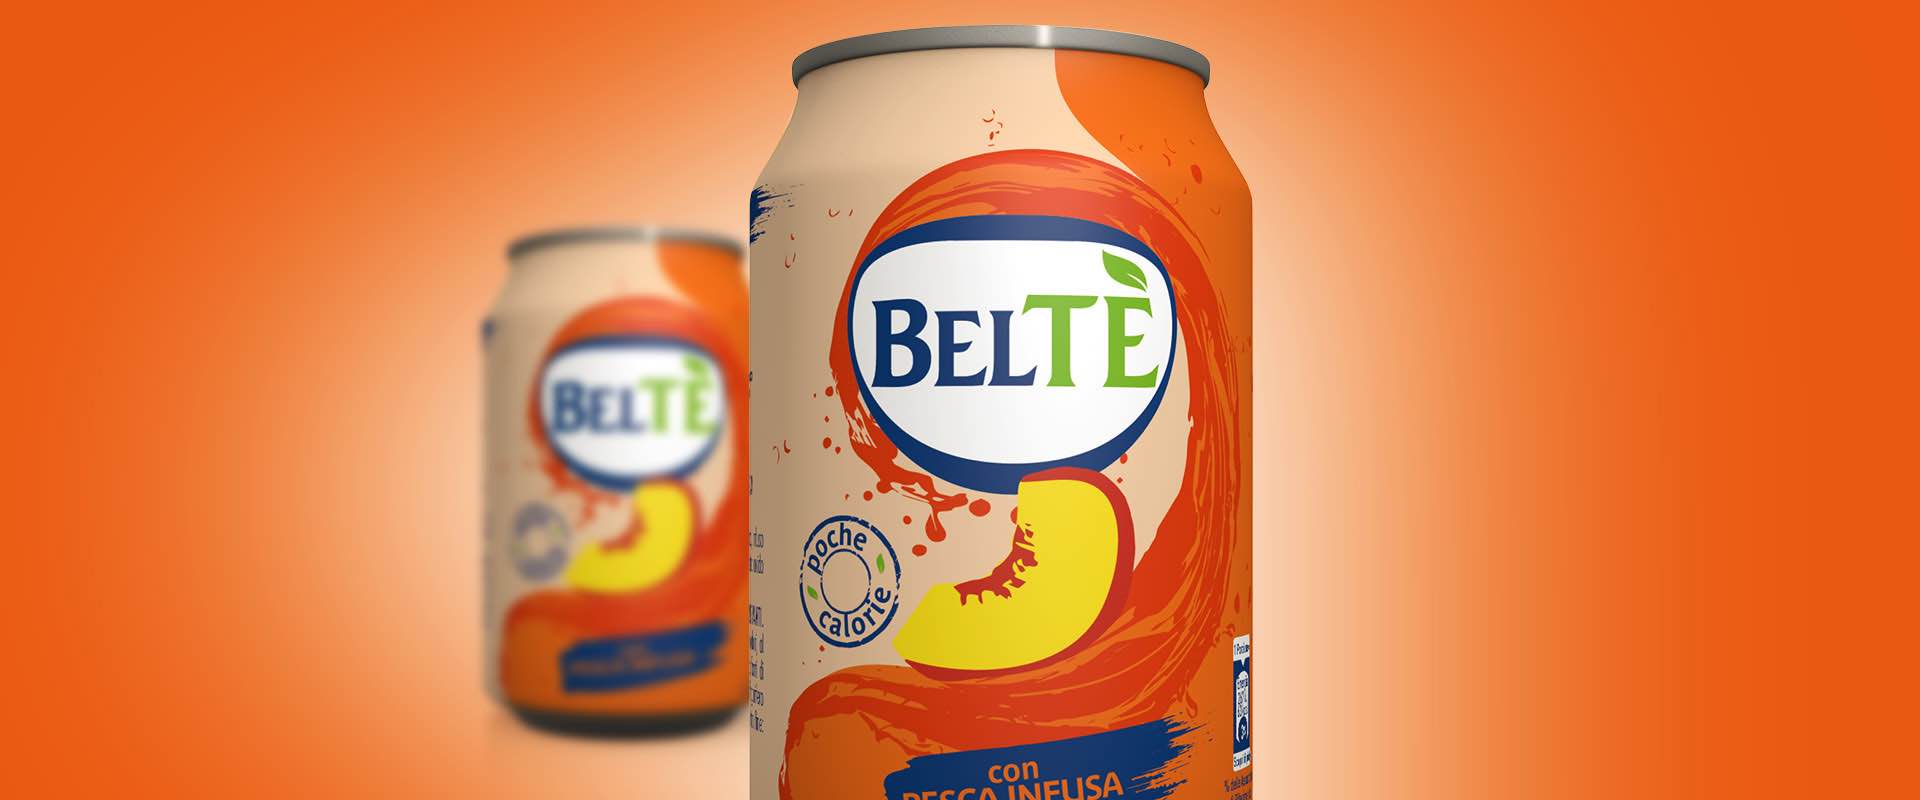 Beltè with peach packaging